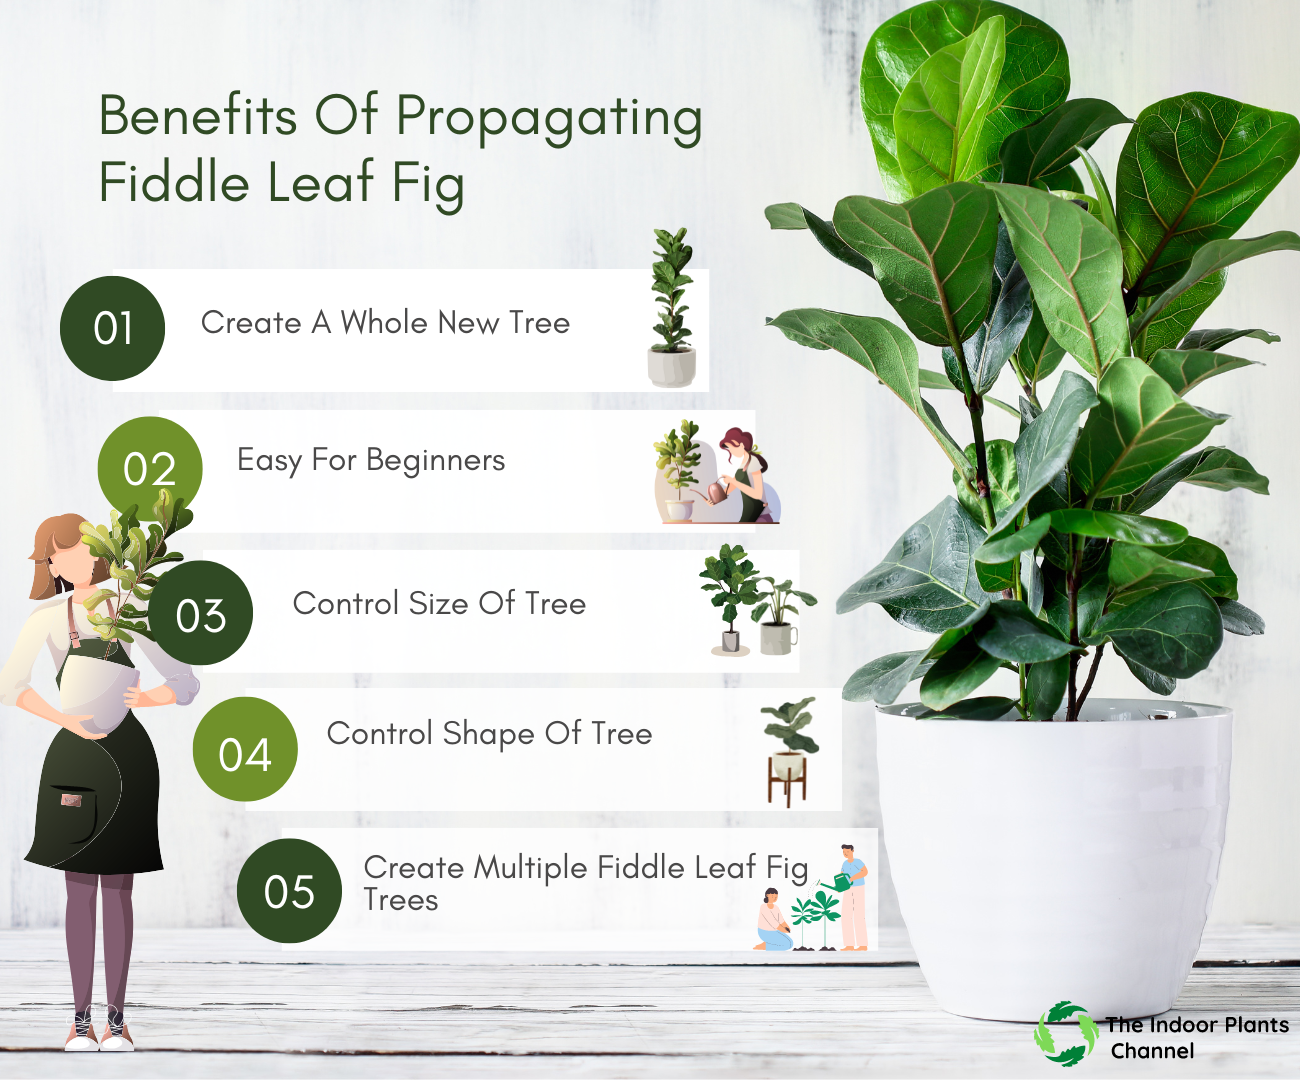 The Benefits Of Propagating Fiddle Leaf Fig